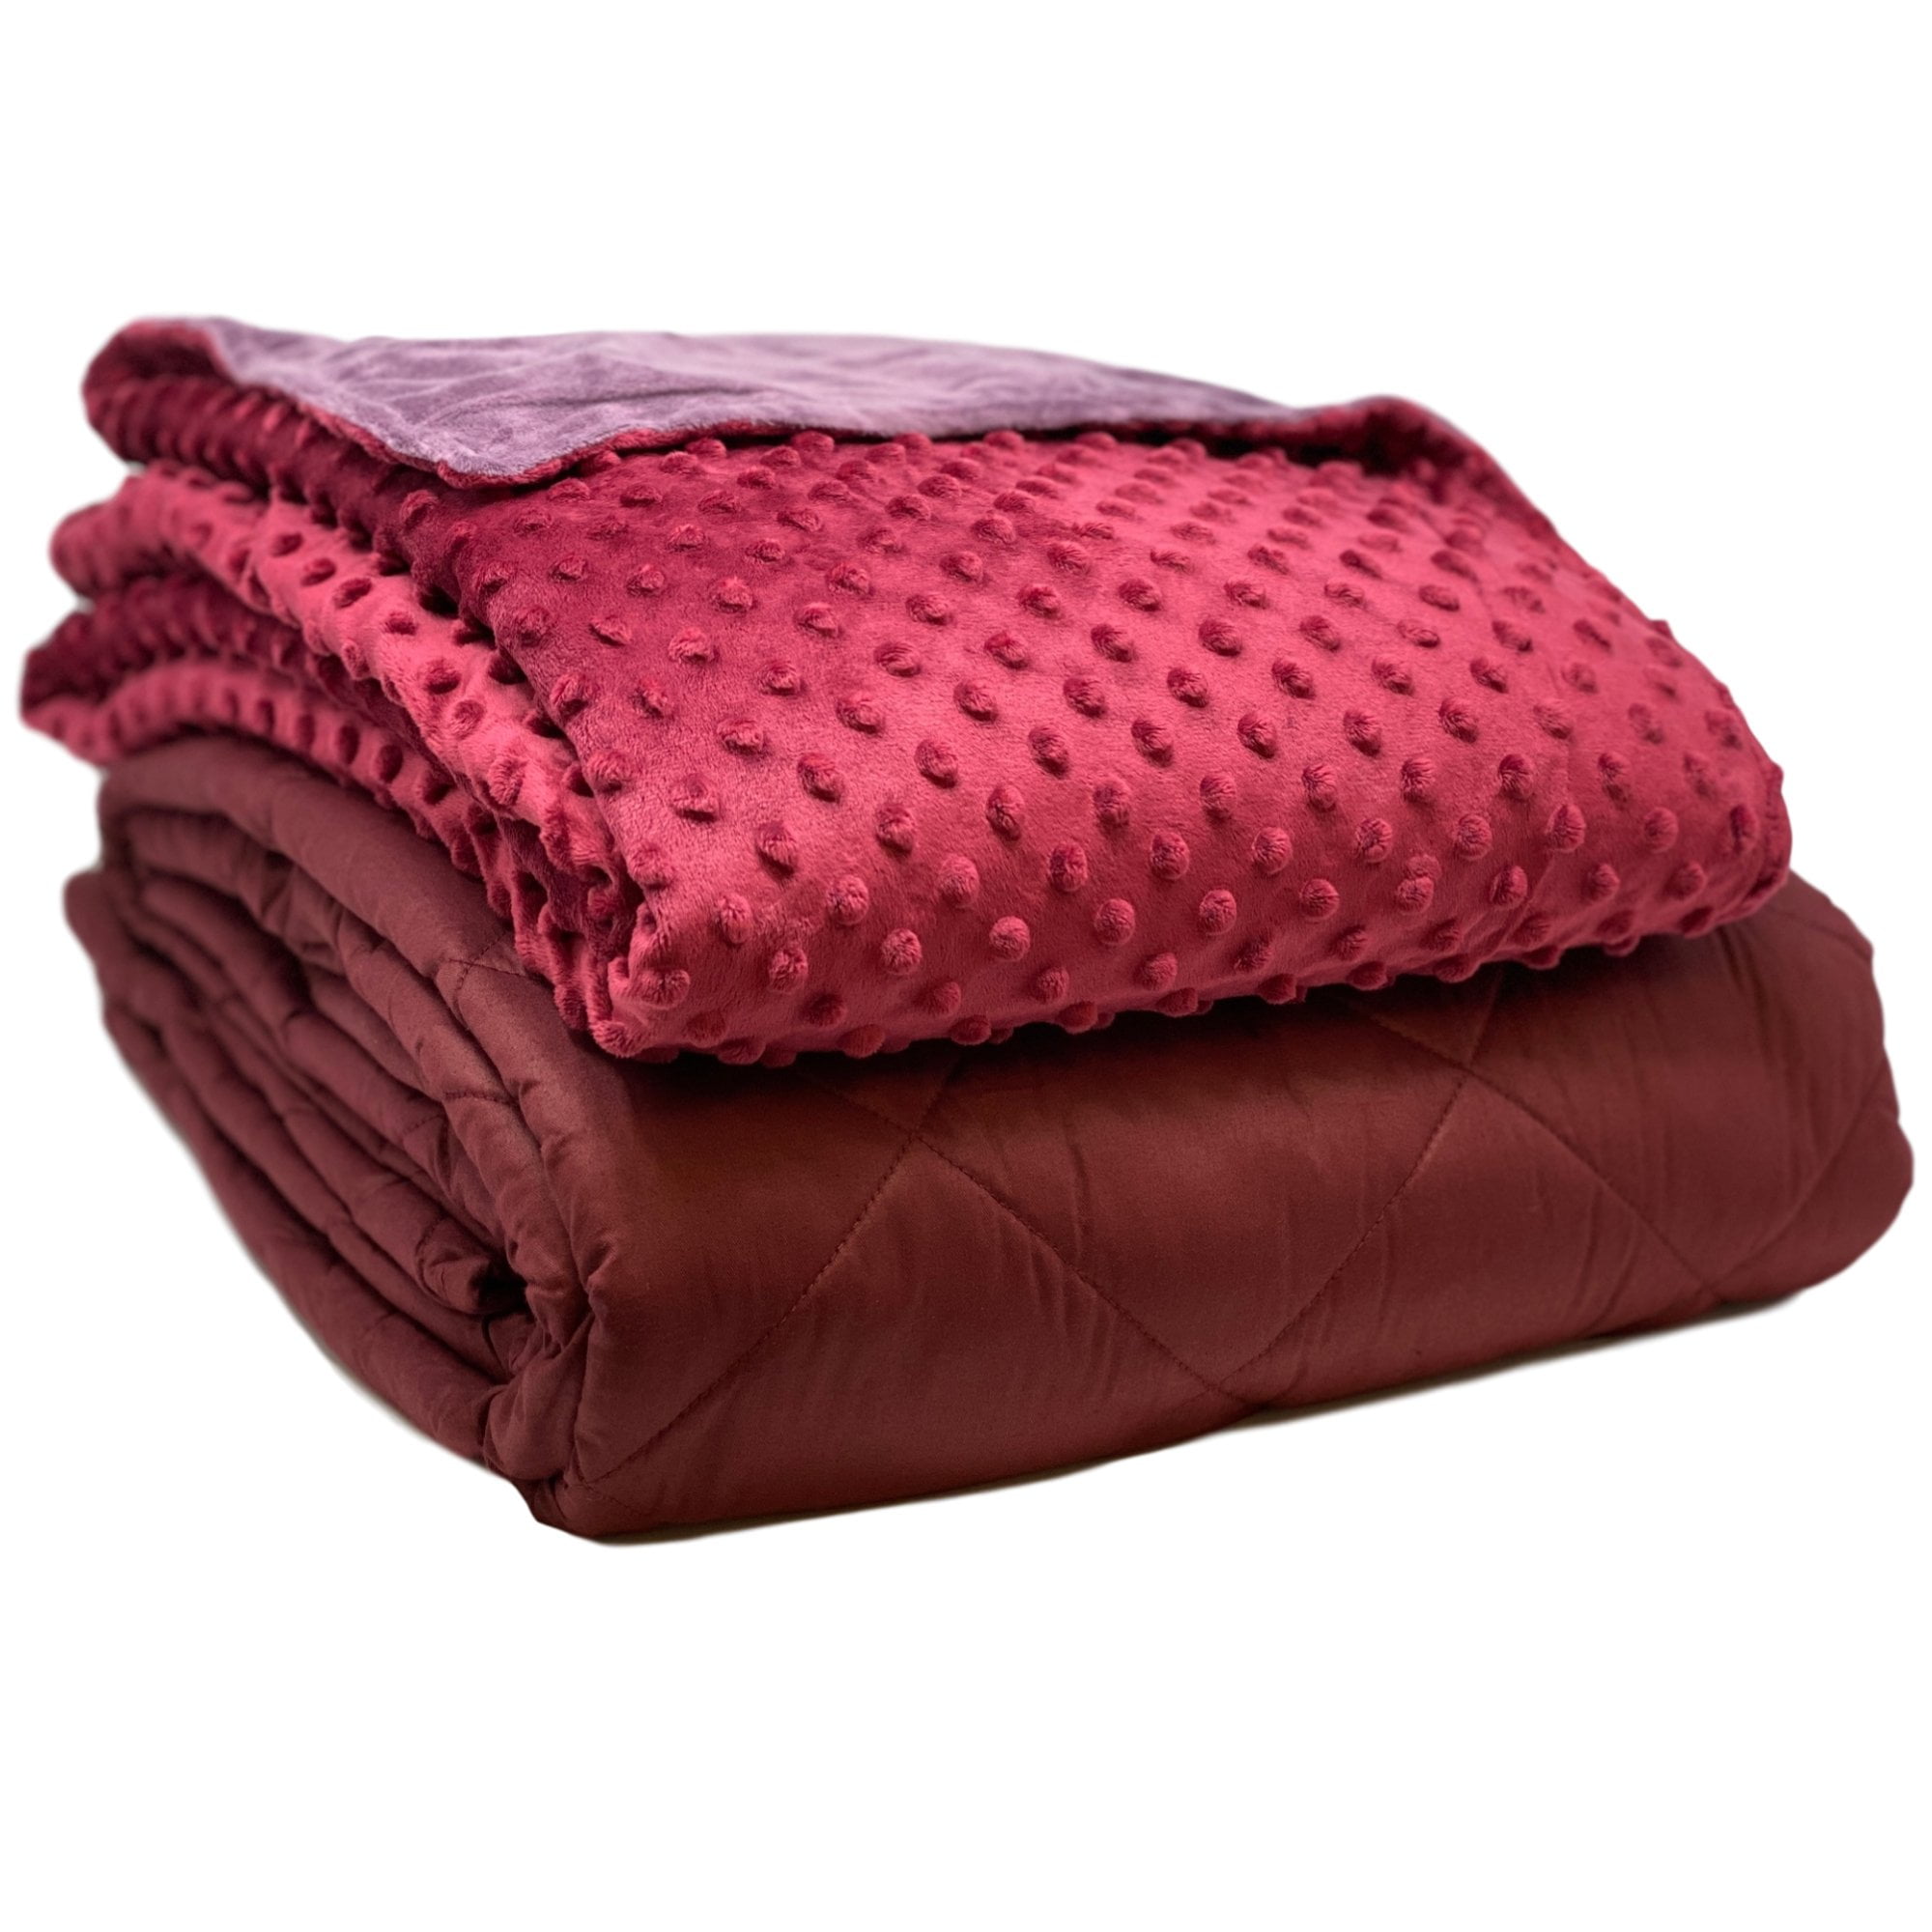 20lbs 60X80-Burgundy COMBO weighted blanket&cover- - Walmart.com